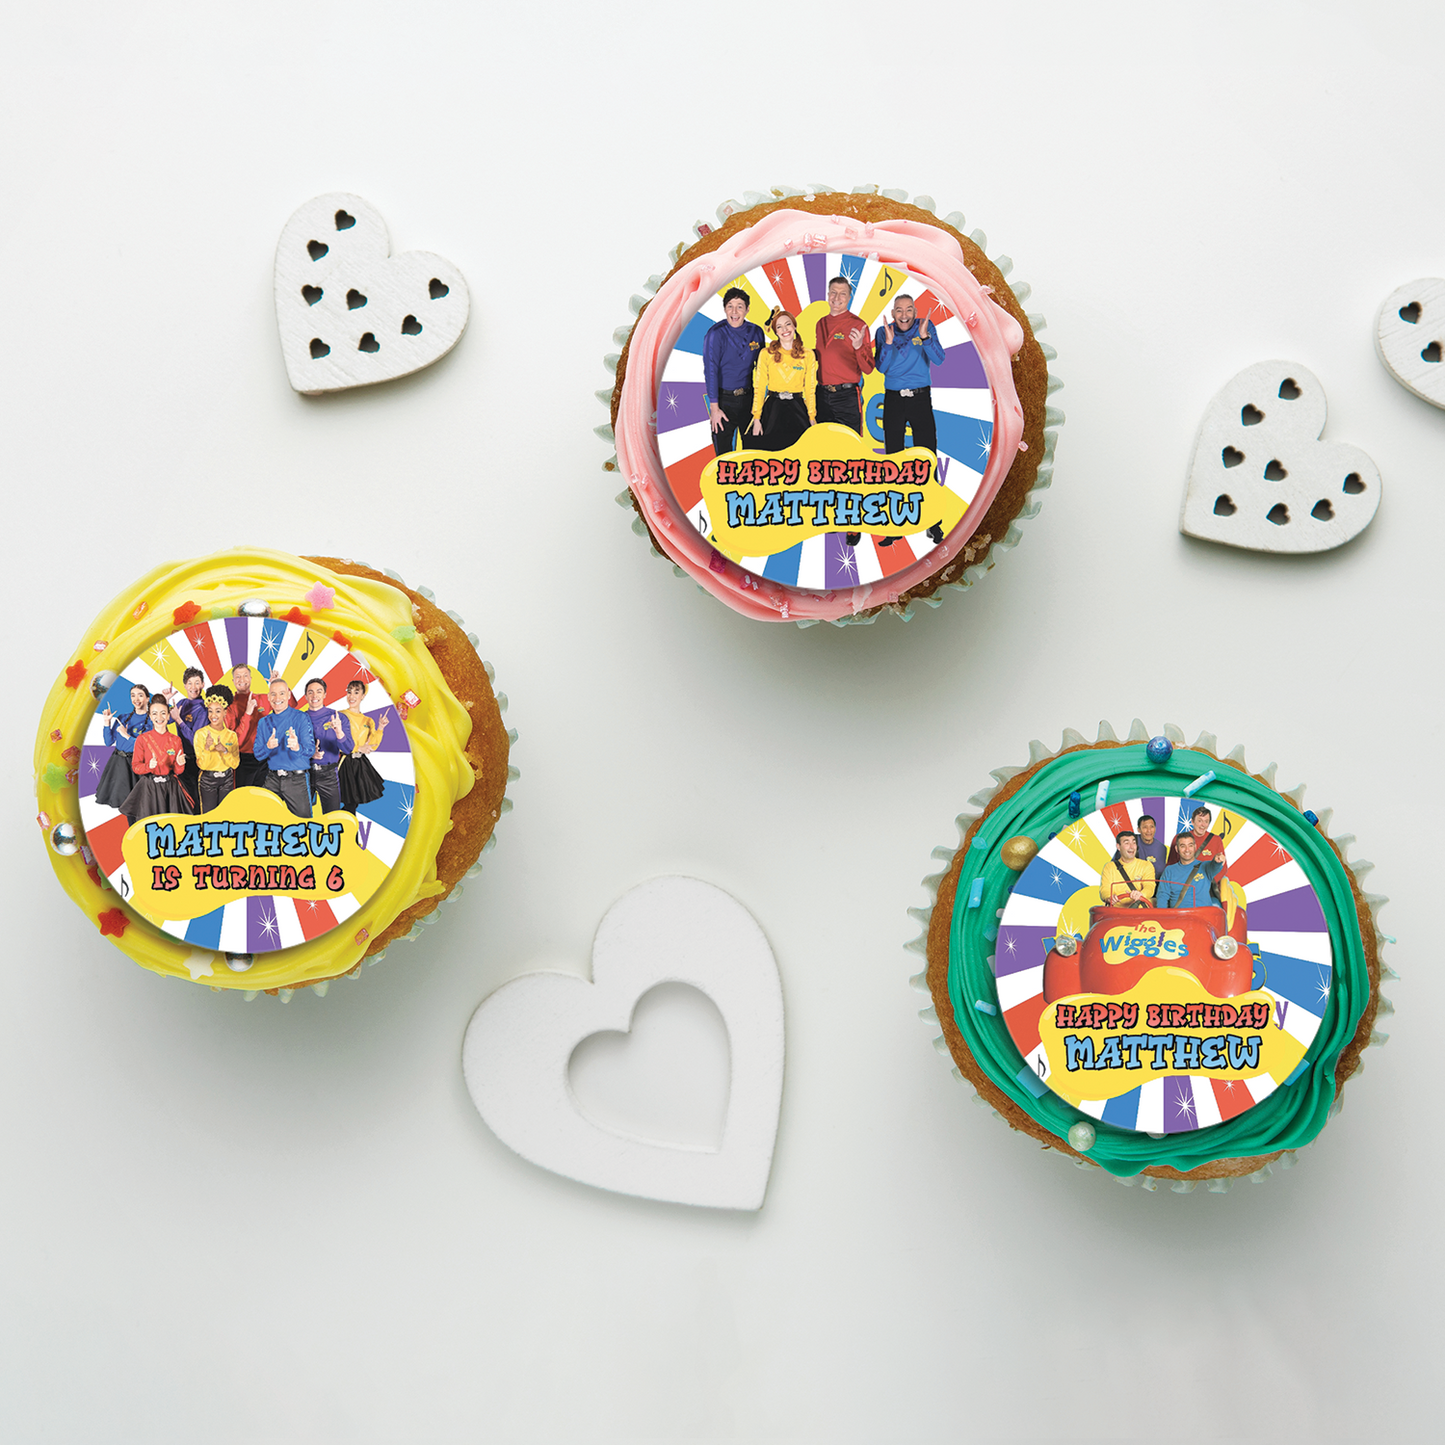 The Wiggles Edible Icing Cupcakes Image - 5cm(D)